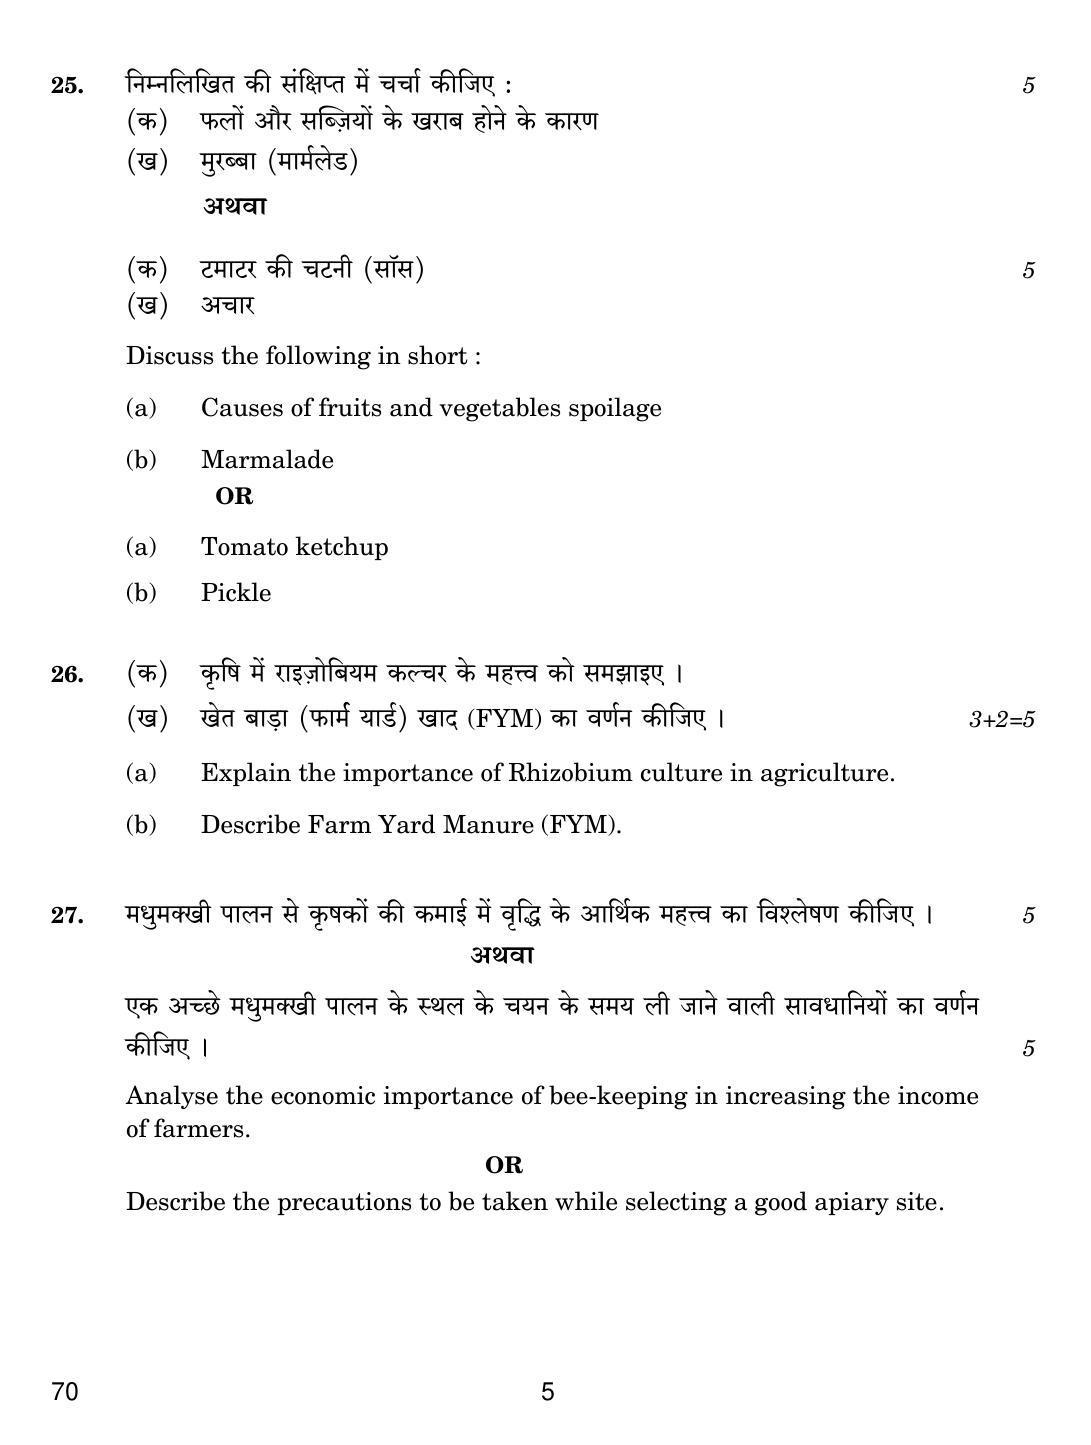 CBSE Class 12 70 AGRICULTURE 2019 Compartment Question Paper - Page 5